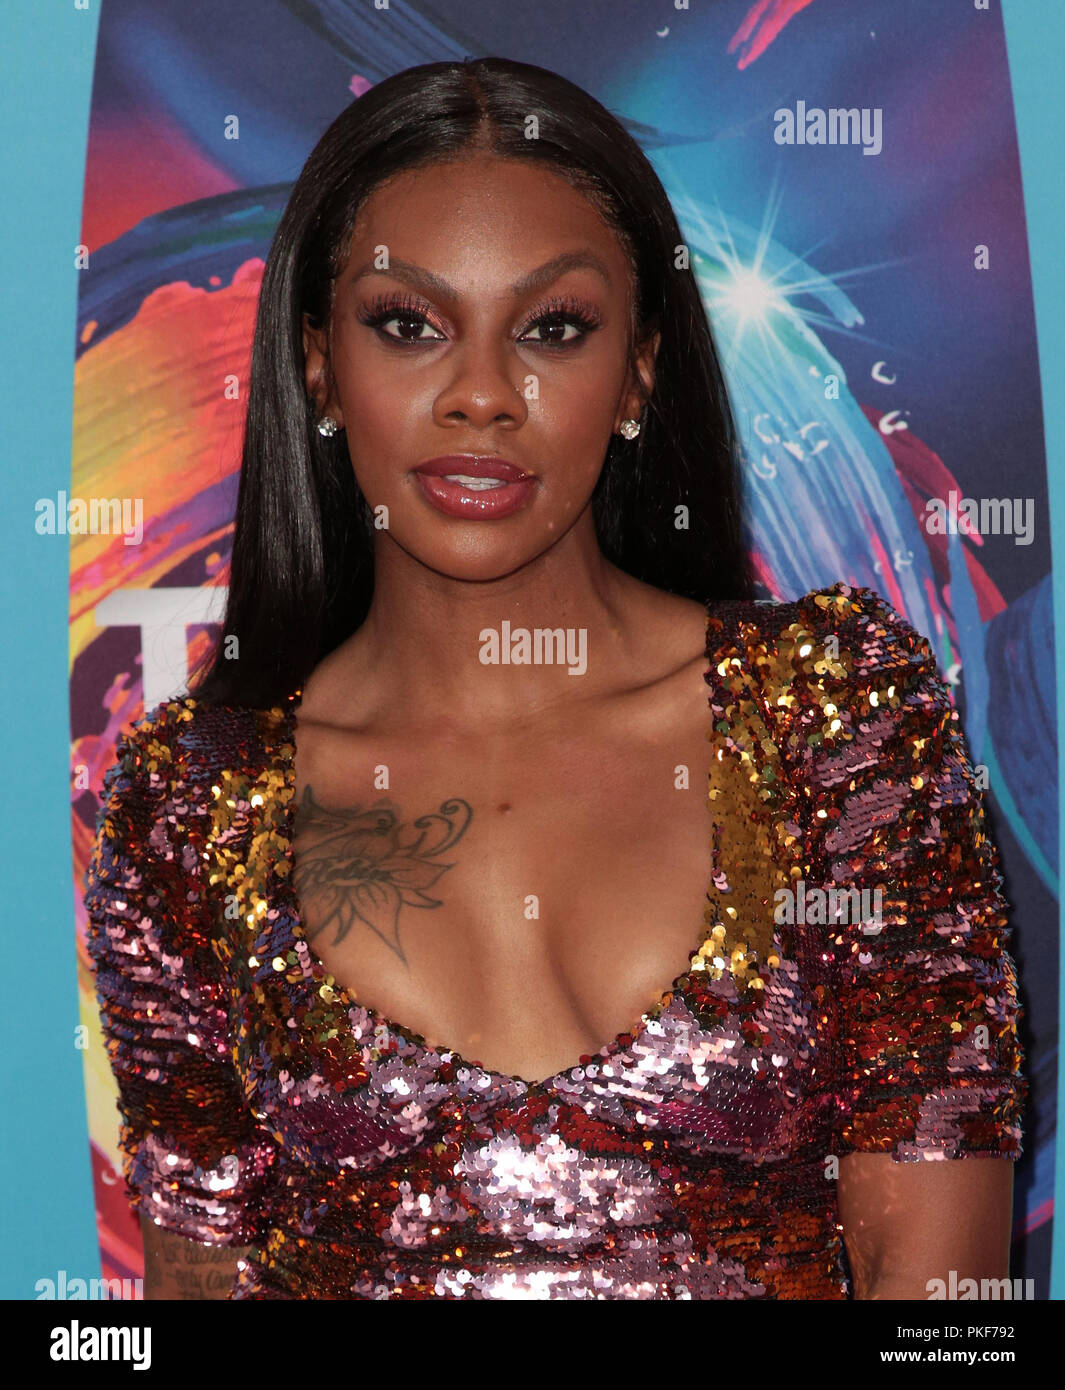 Celebrities attend Teen Choice Awards 2018 at The Forum.  Featuring: Jess Hilarious Where: Beverly Hills, California, United States When: 12 Aug 2018 Credit: Brian To/WENN.com Stock Photo